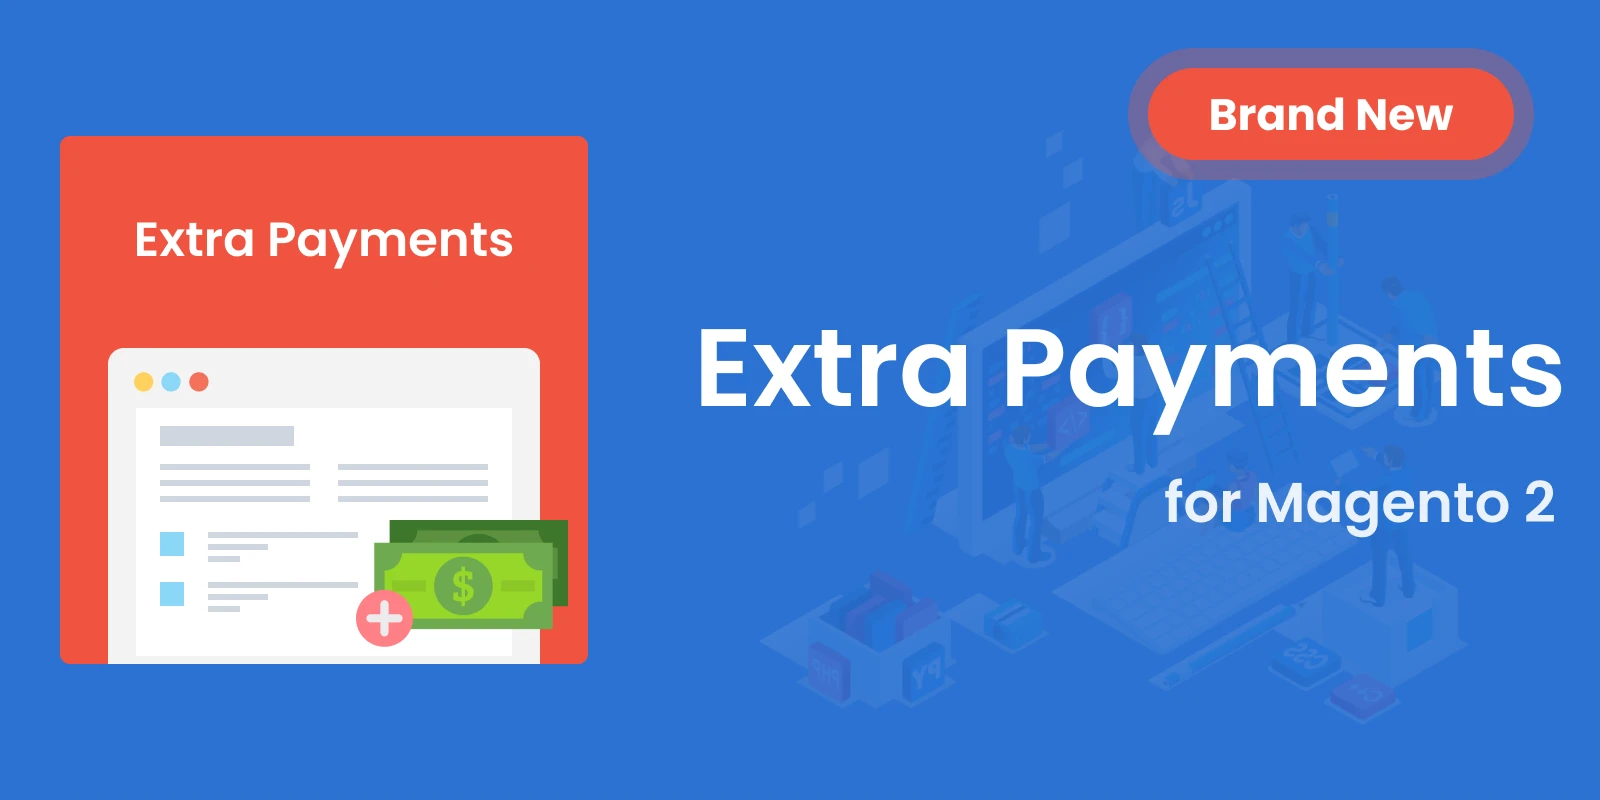 New Module: Magento 2 Extra Payments